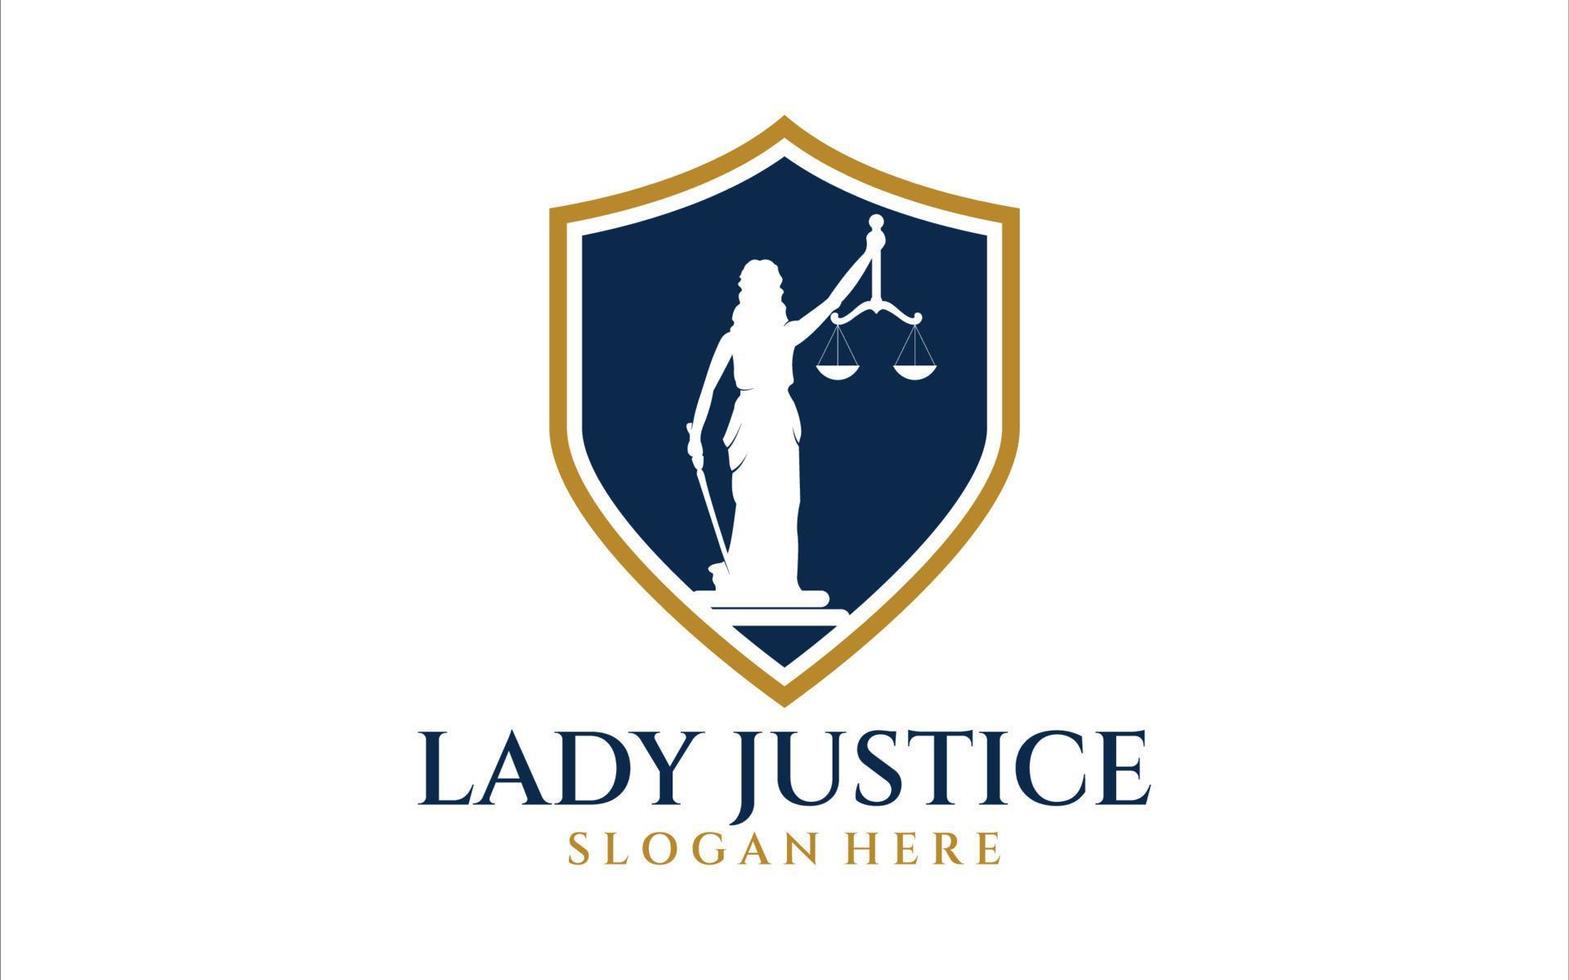 lady law concept, lawyer, justice design.Logo or label for law firm. Vector illustration.